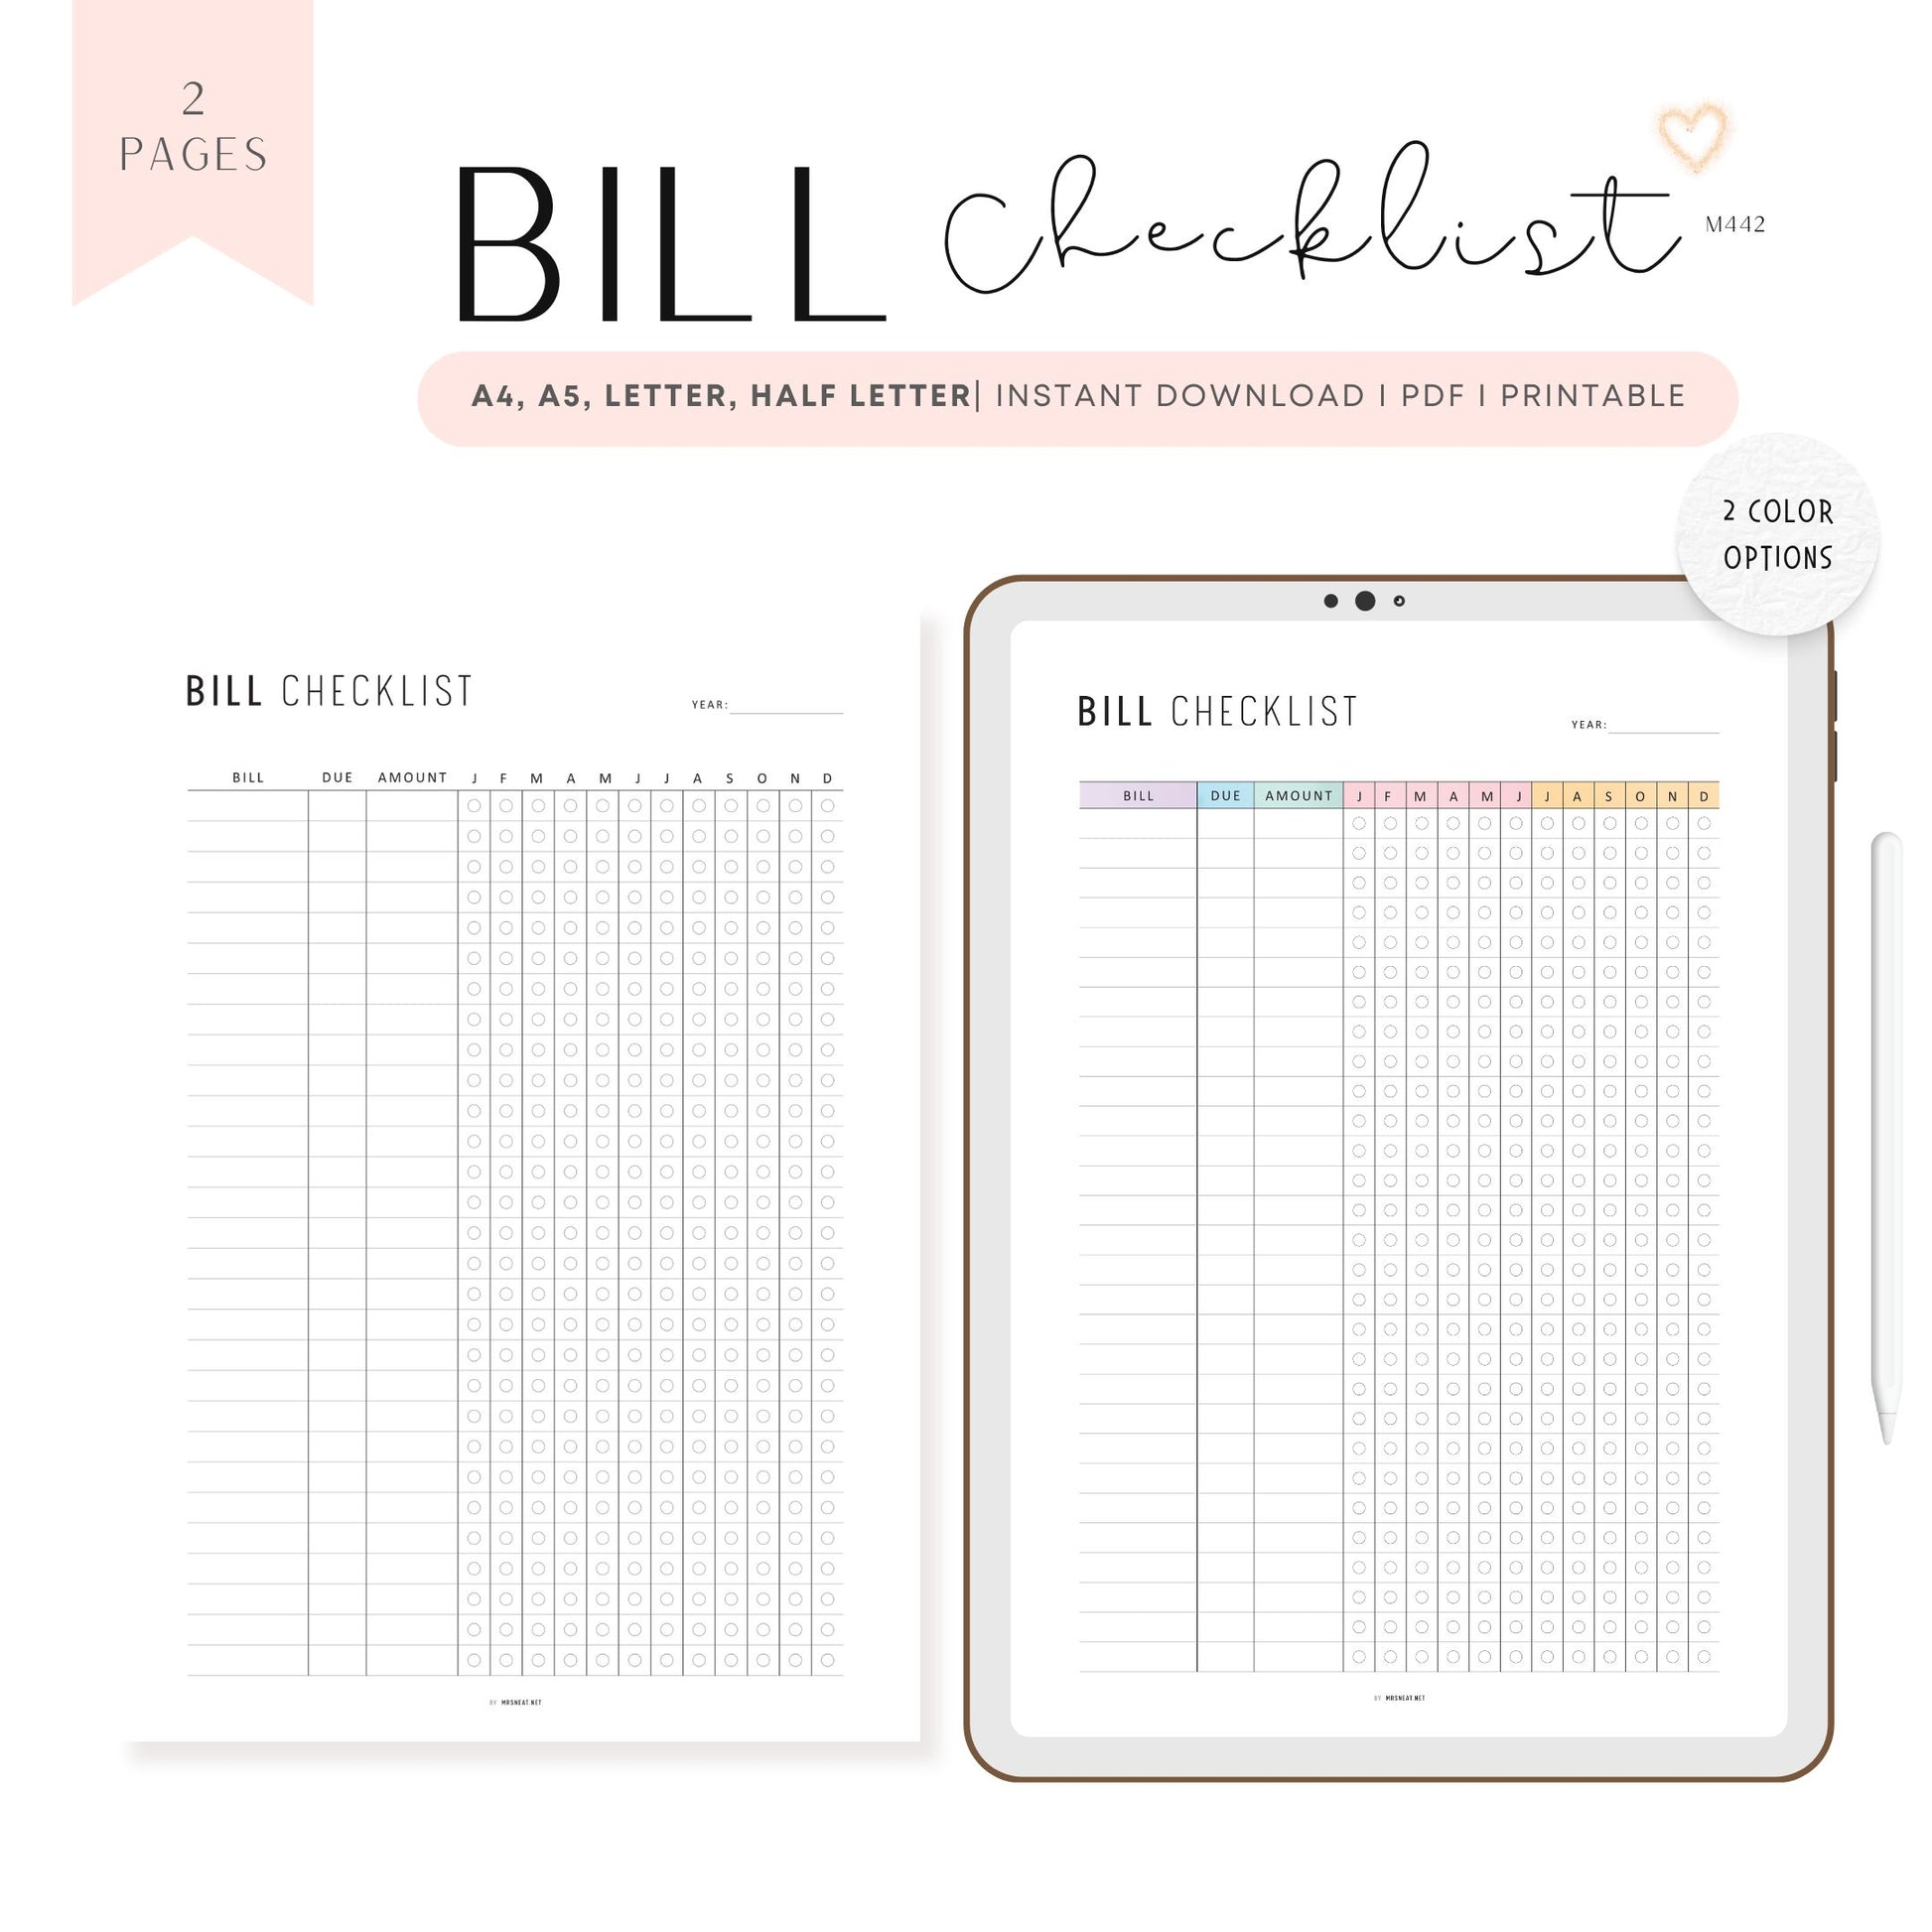 One Year Bill Checklist Printable, 12 Month Bill Payment Checklist, A4, A5, Letter, Half Letter, Minimalist & Colorful Page